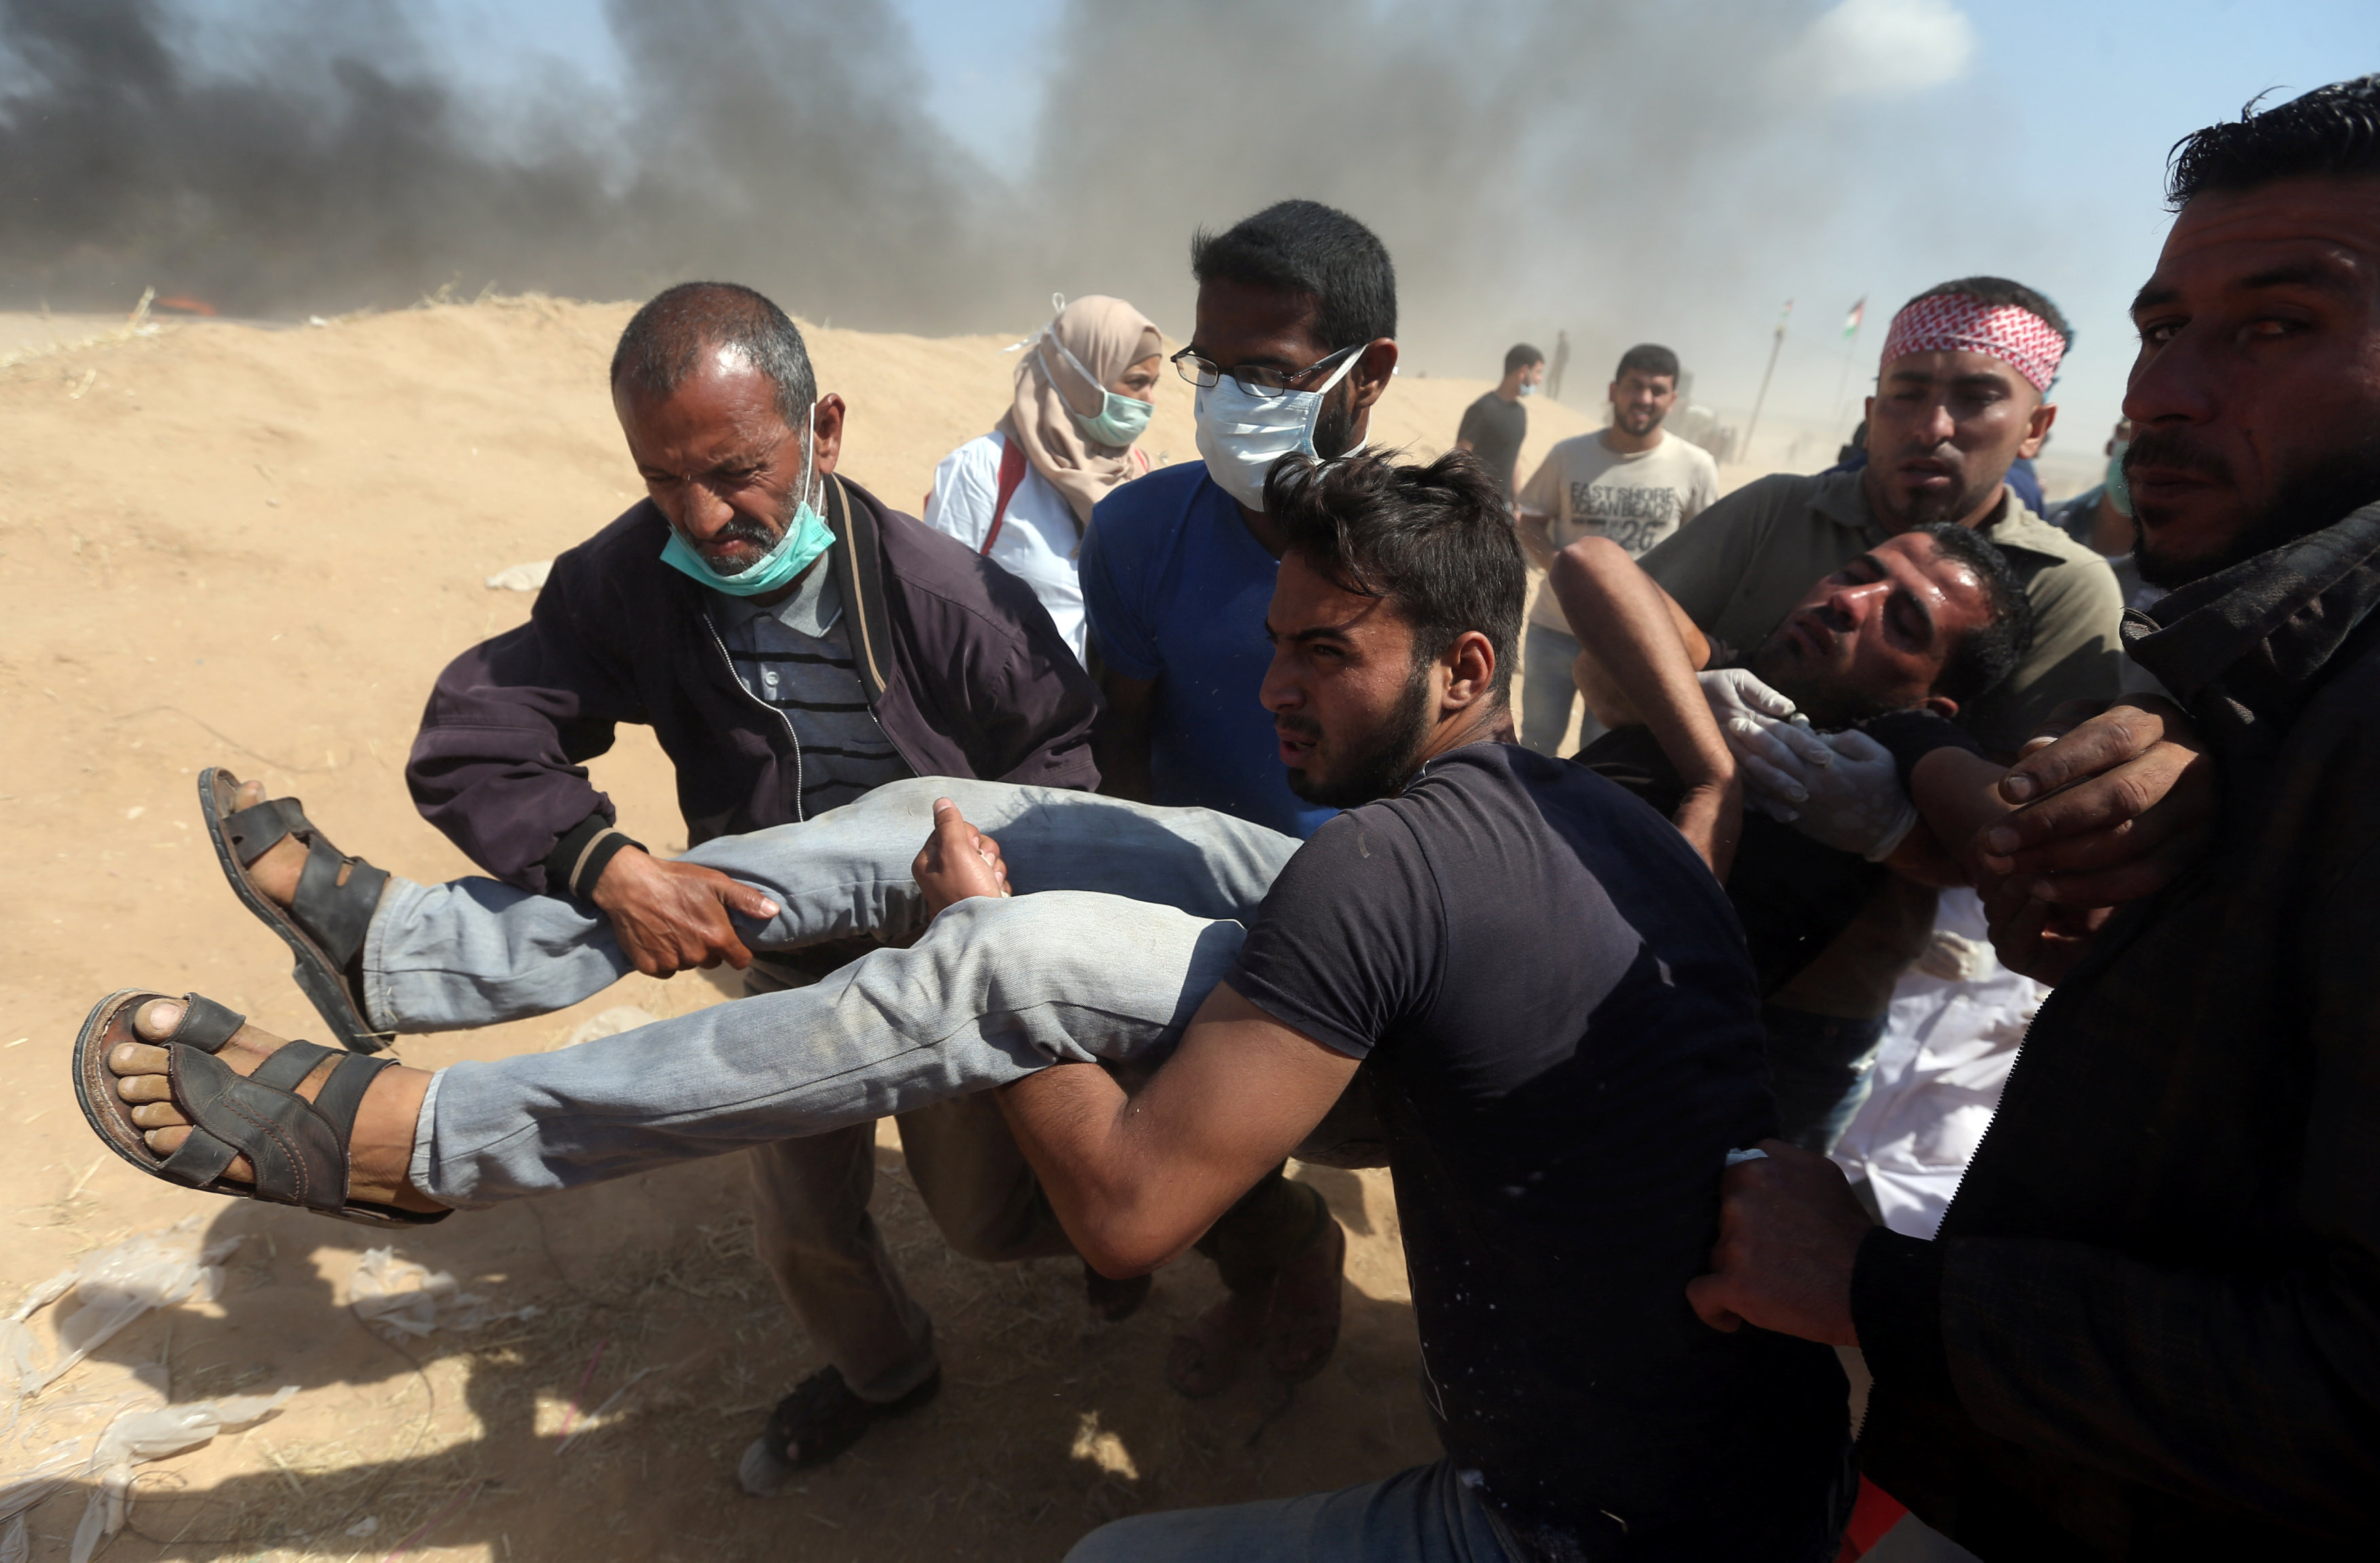 Wounded Palestinian demonstrator is evacuated during a protest marking the 70th anniversary of Nakba, at the Israel-Gaza border in the southern Gaza Strip